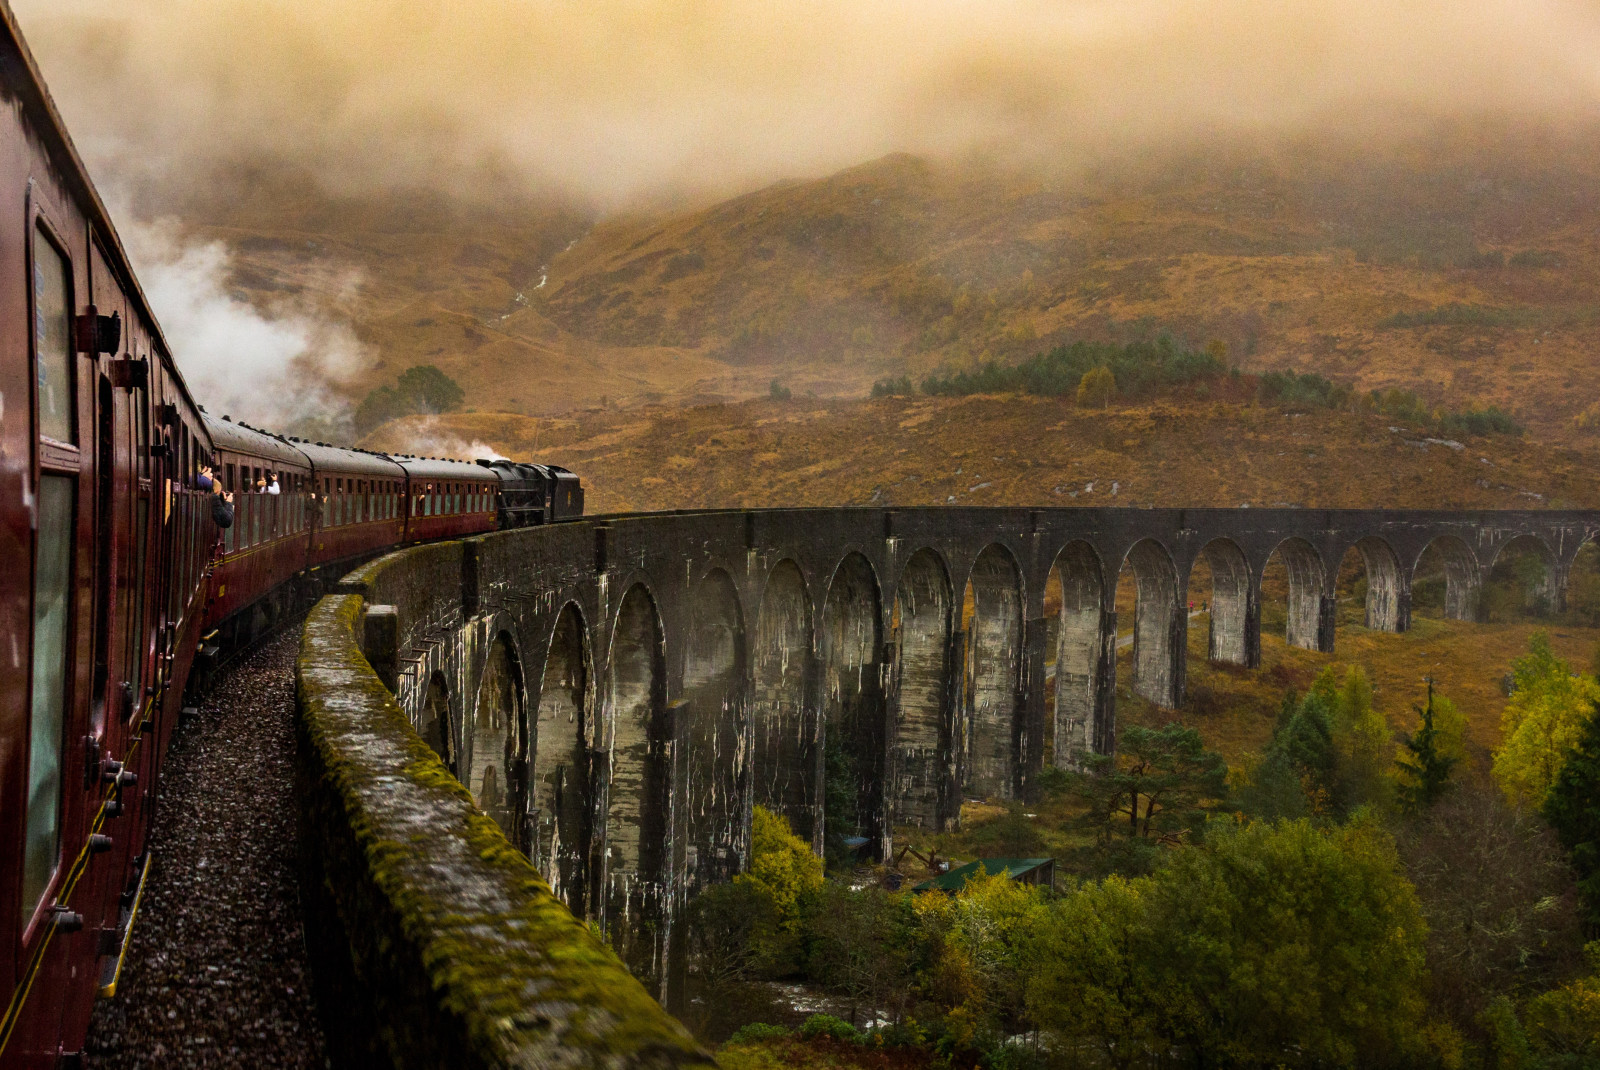 The Jacobite Express in Scotland, a long red train with clear windows steaming ahead over a gray stone bridge with arches and green moss, brown grassy hills and tall green trees below and in the distance with misty clouds.